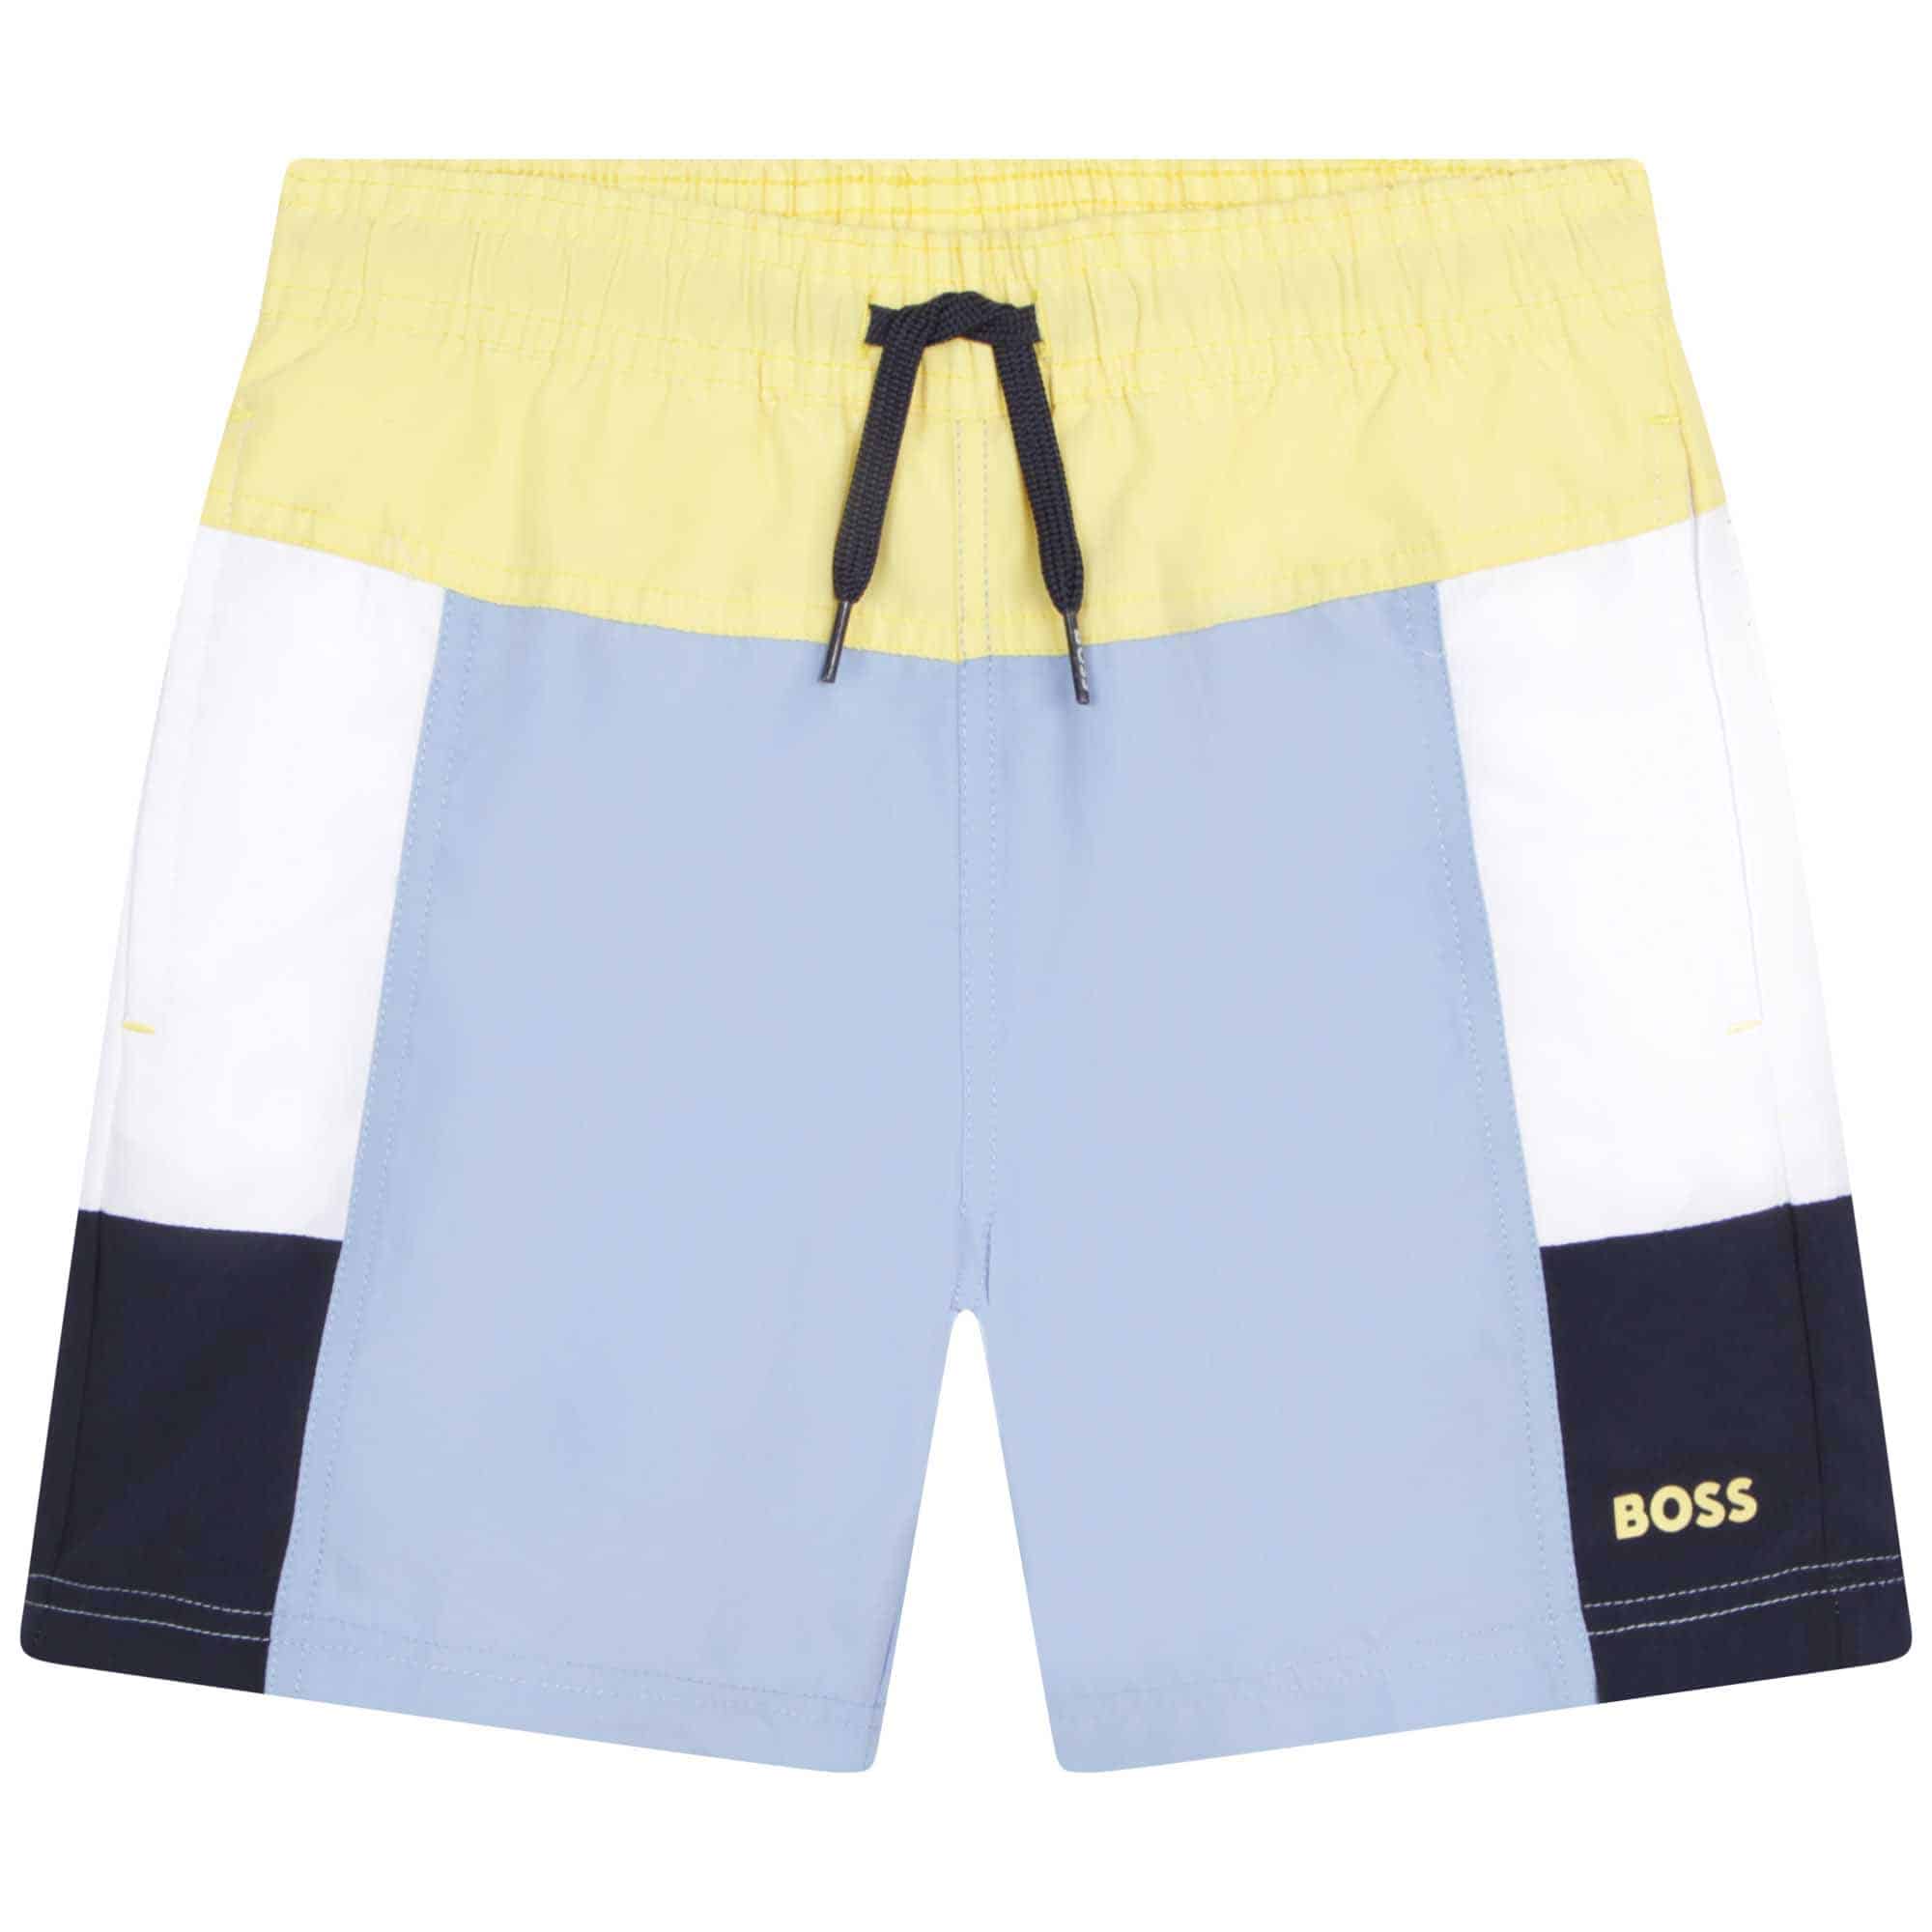 Boss boys shorts in blue, lemon, black and white front view